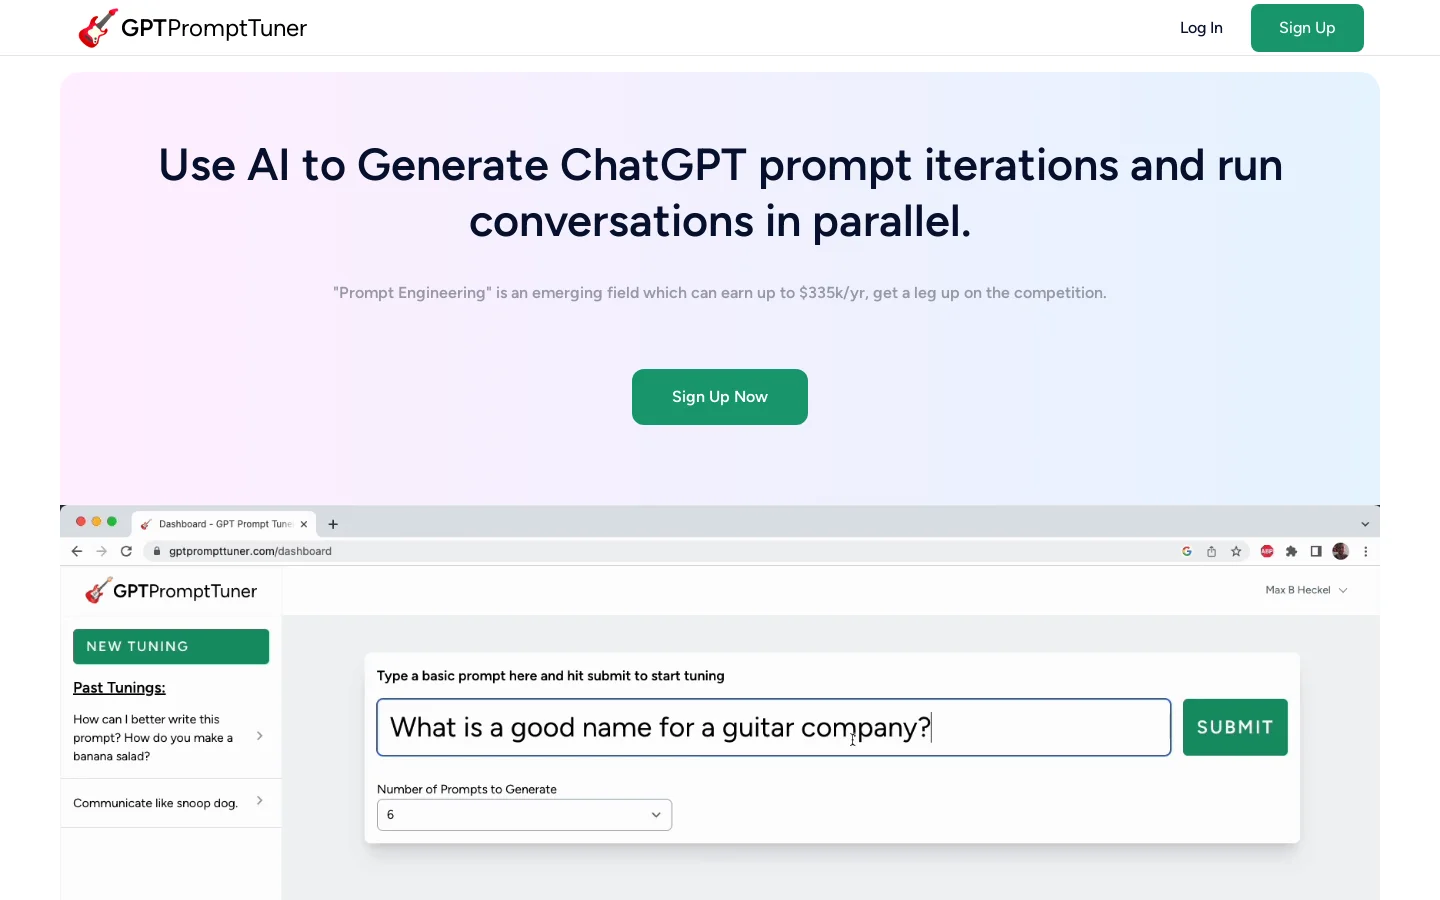 GPT Prompt TunerUse AI to improve ChatGPT prompts